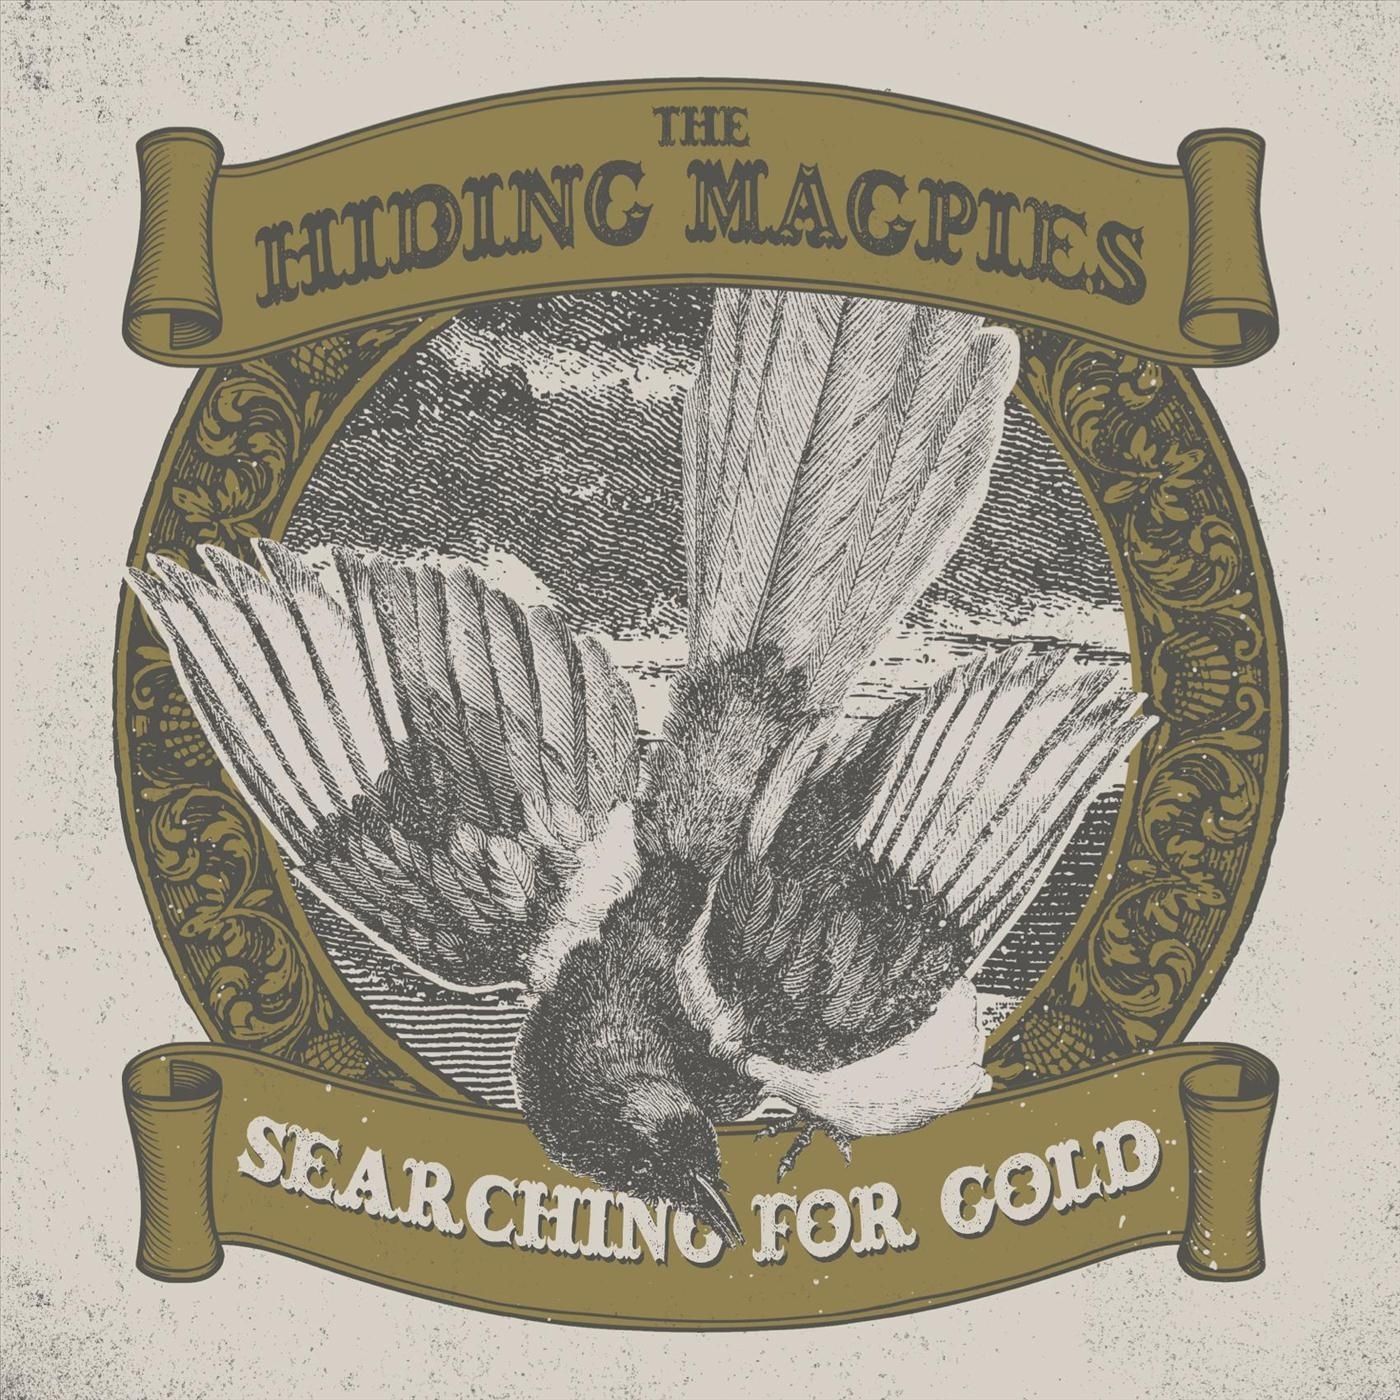 The Hiding Magpies – Searching For Gold